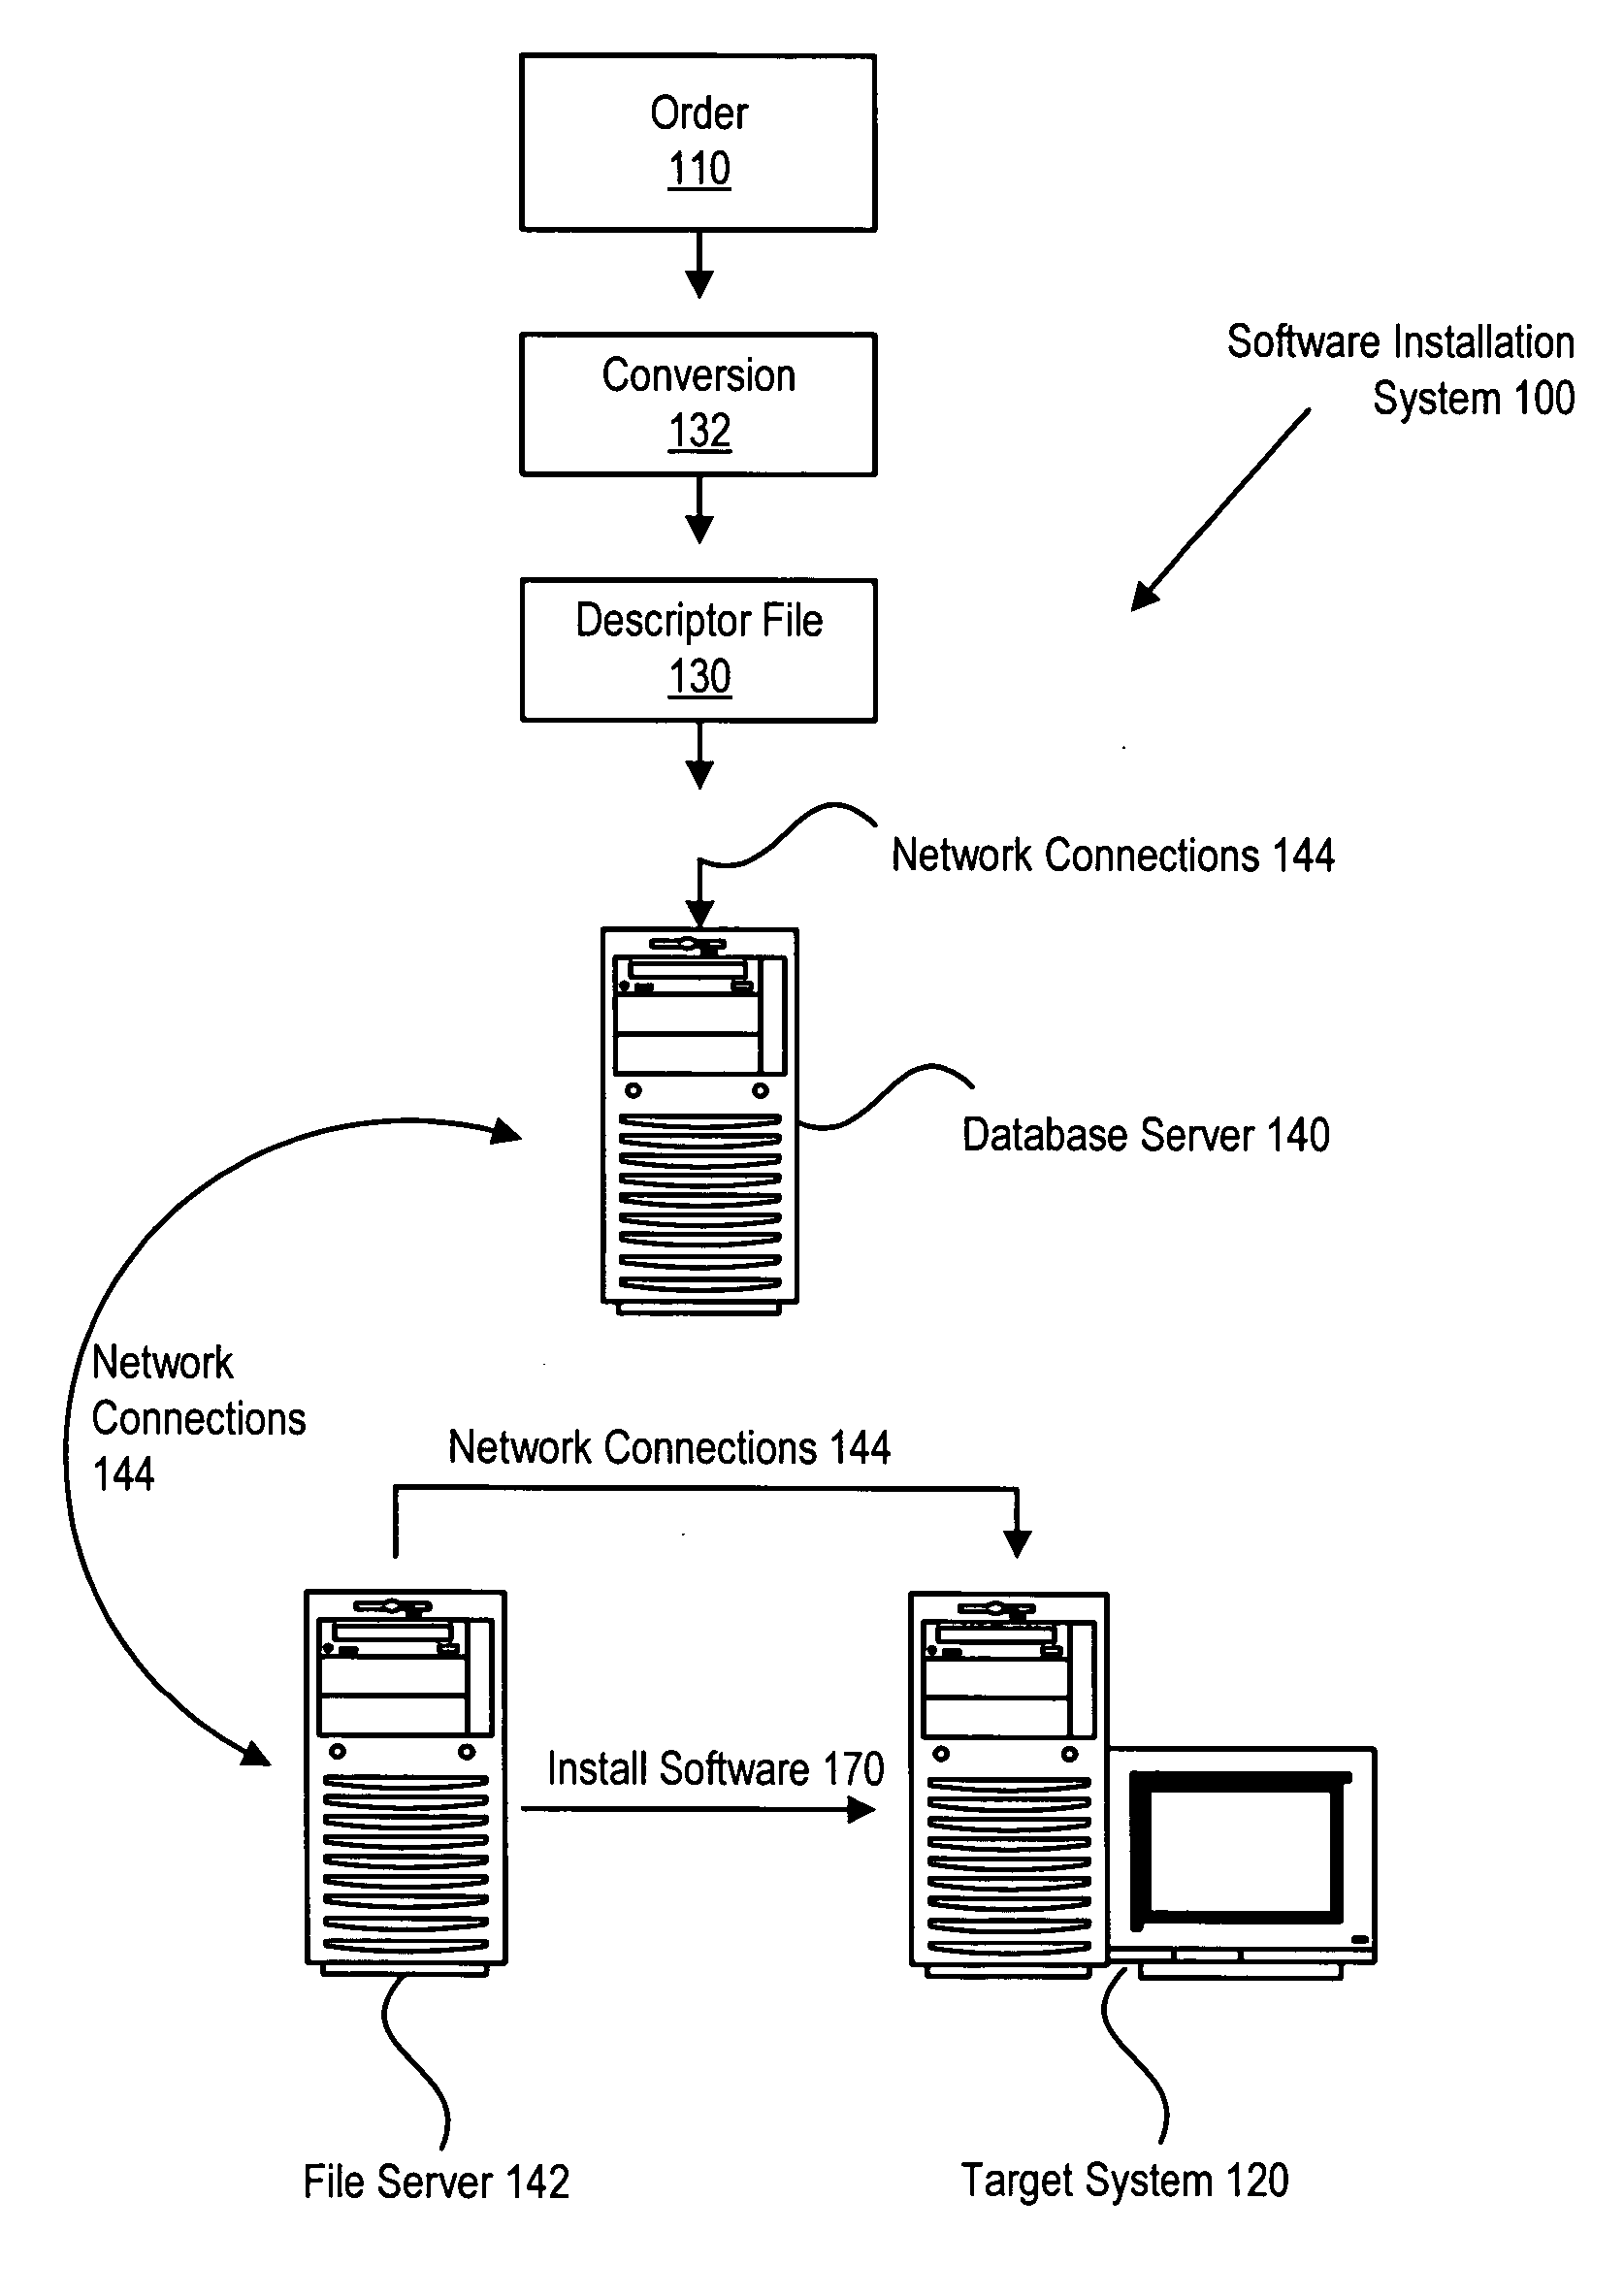 Integrated chaining process for continuous software integration and validation